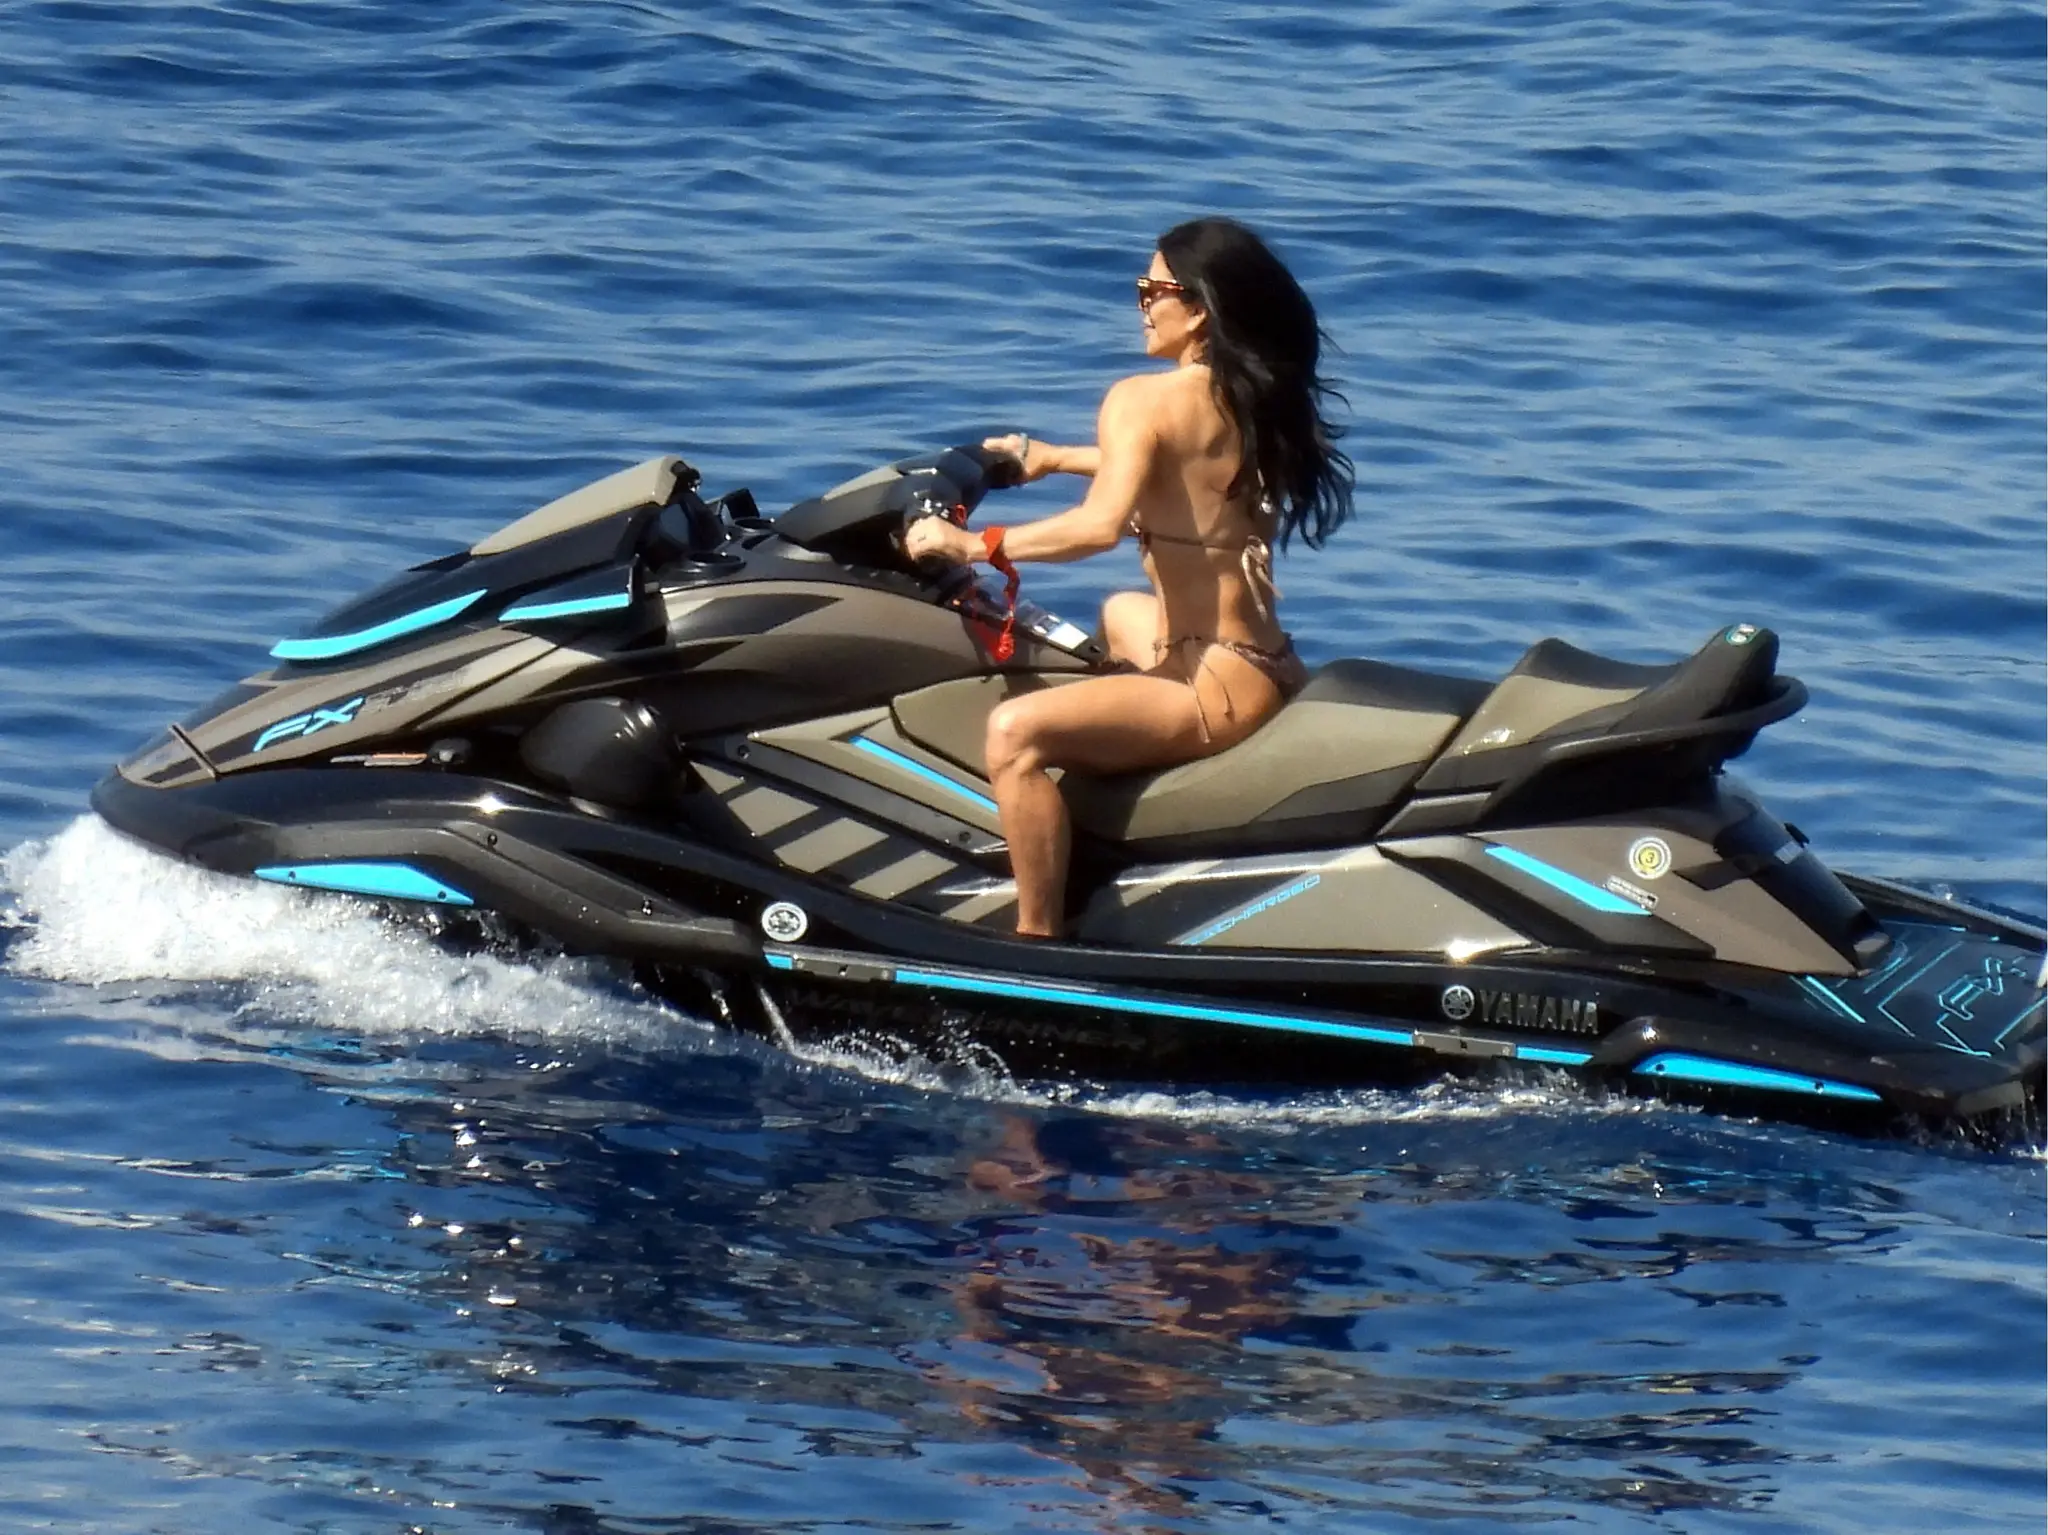 Lauren Sánchez goes jet skiing with Jeff Bezos and Kim Kardashian while hanging out on mega yacht in Greece